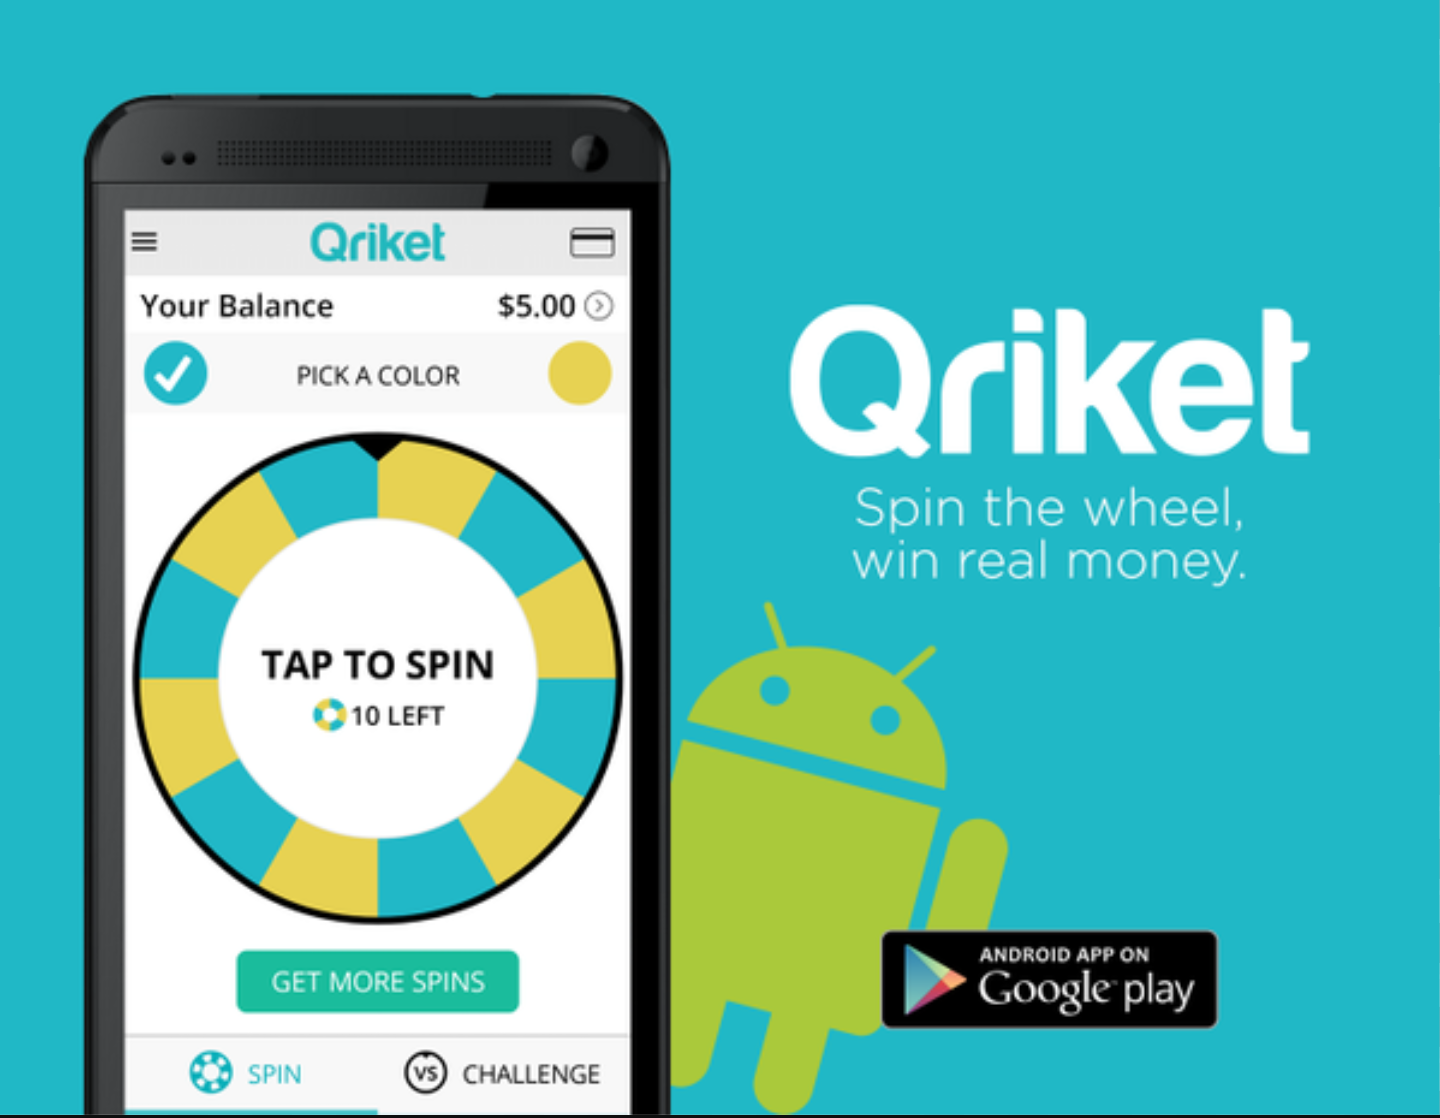 Spin left. Spin Wheel and win real money. Android Spinner Picker. Qriket Hacks.